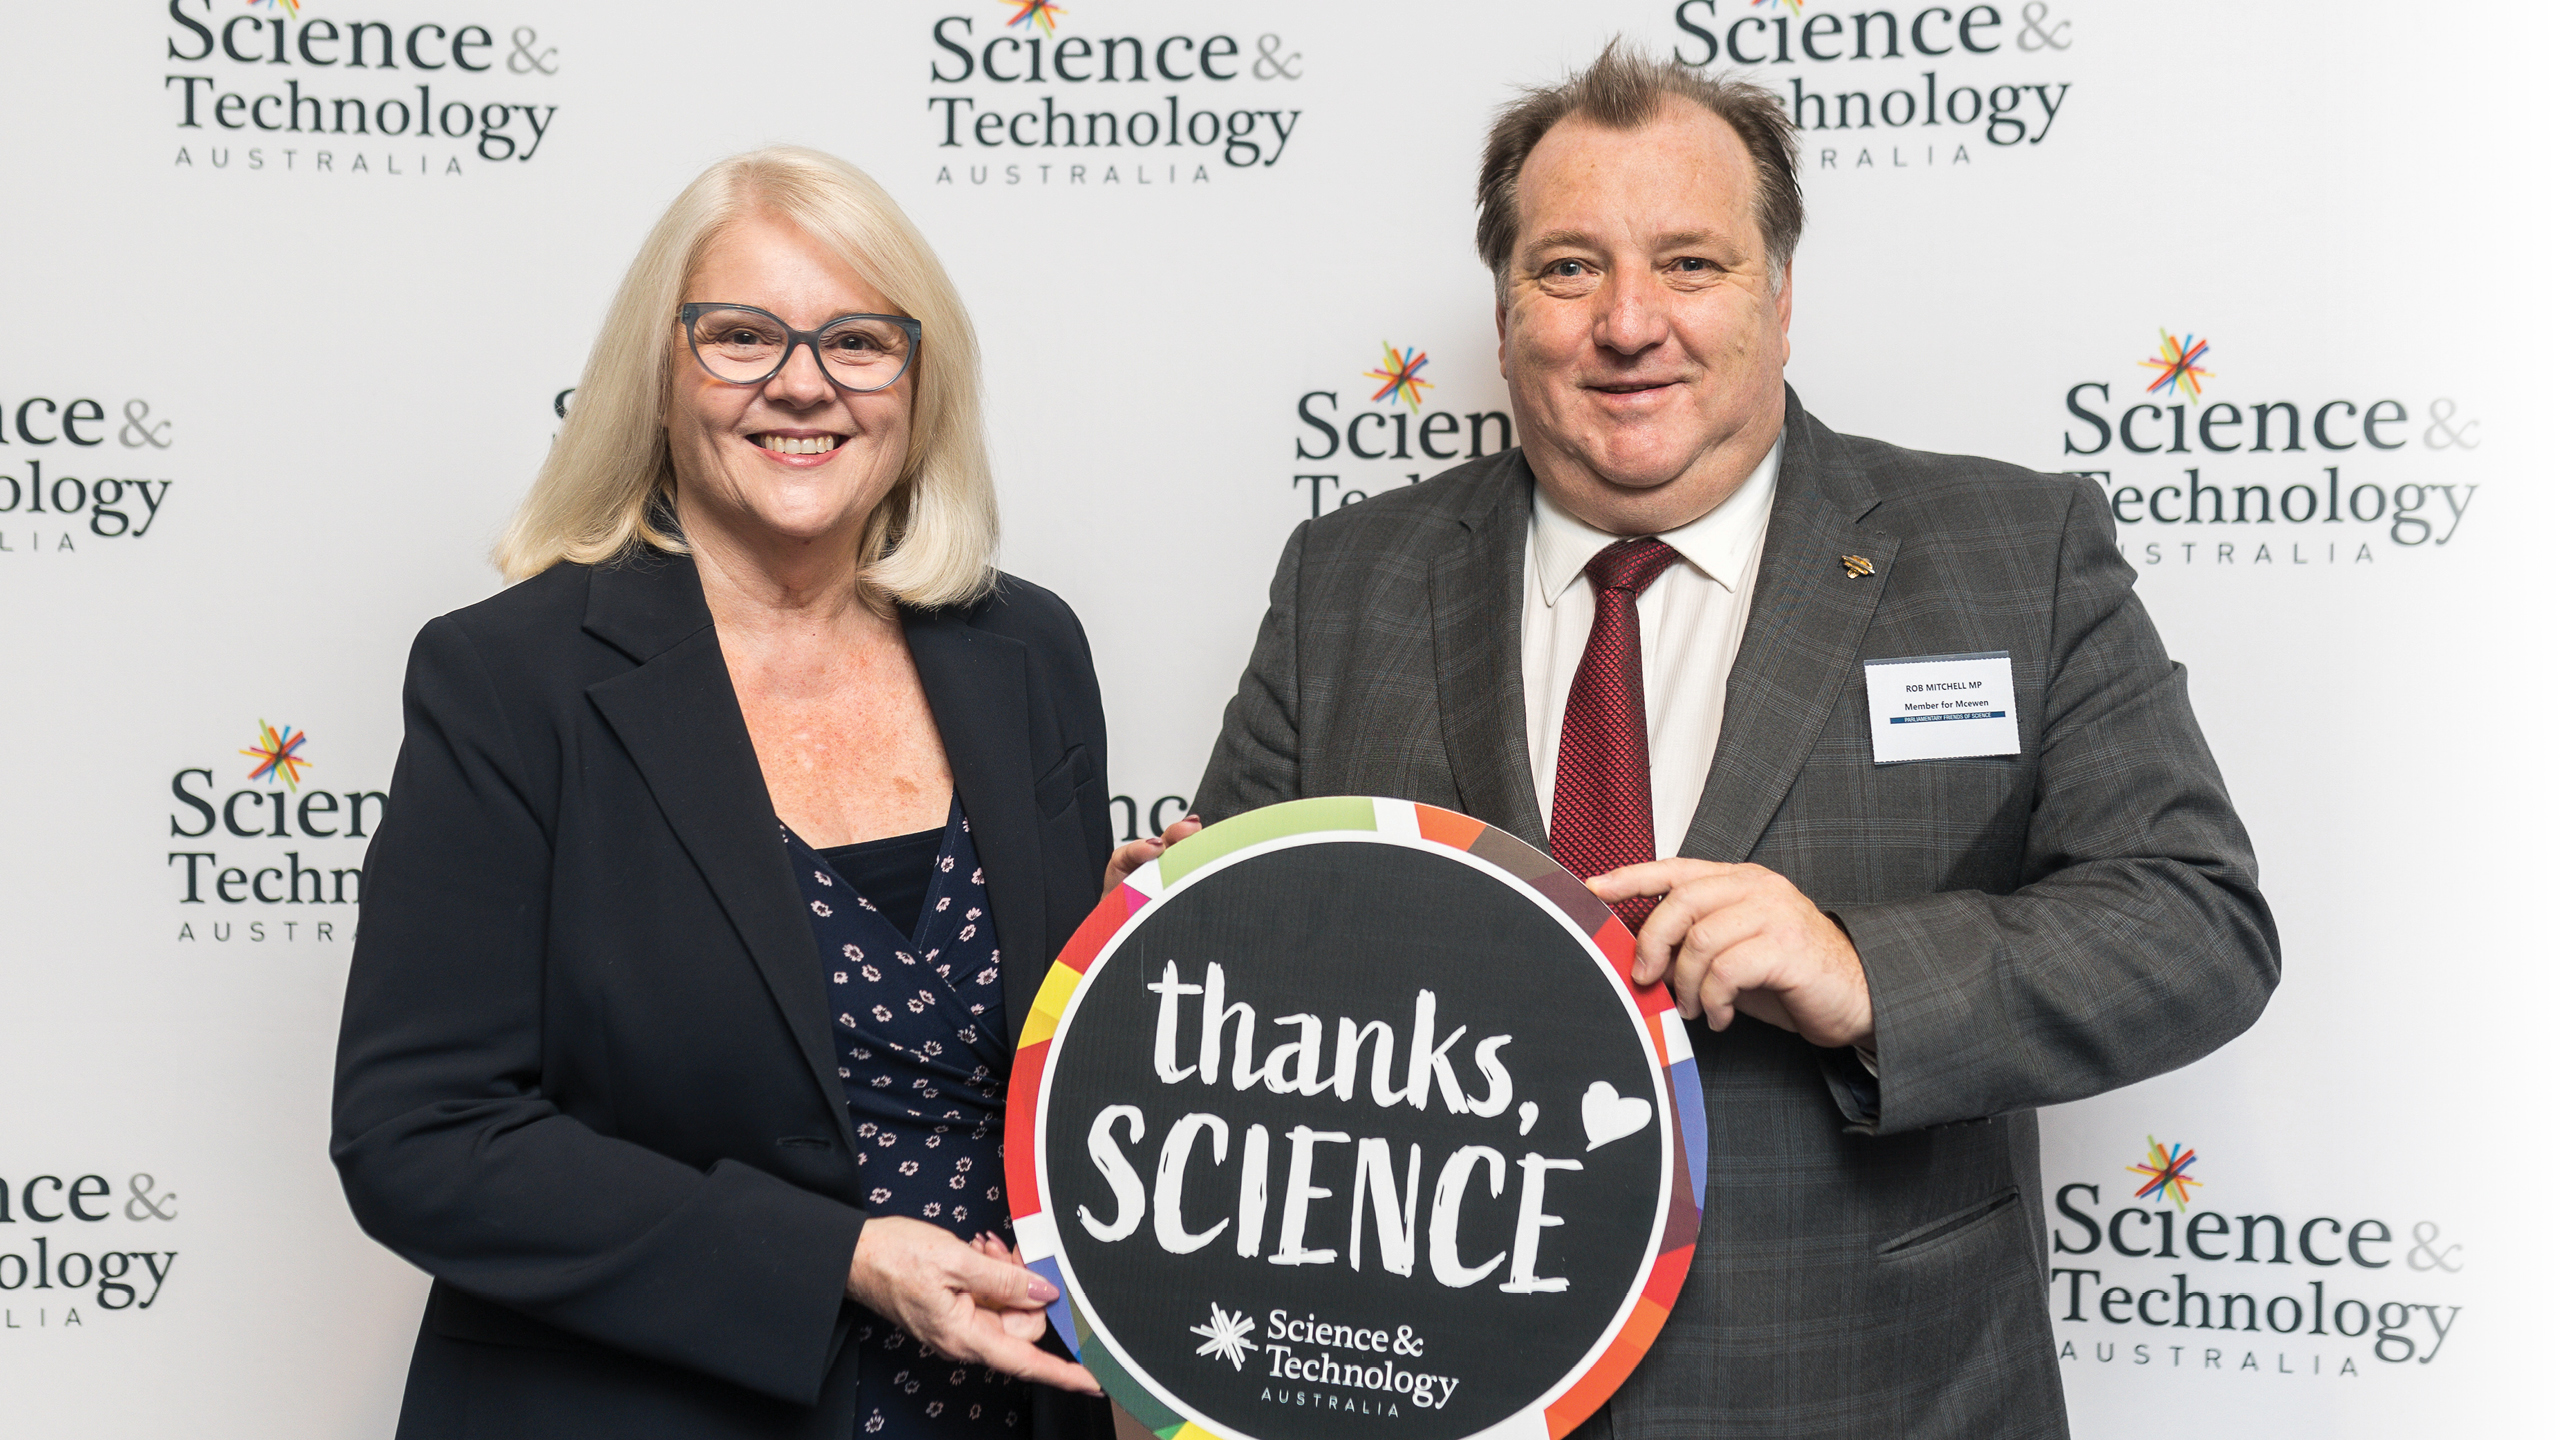 A photo of two smiling people, one woman and one man, holding a sign that reads "Thanks, Science"